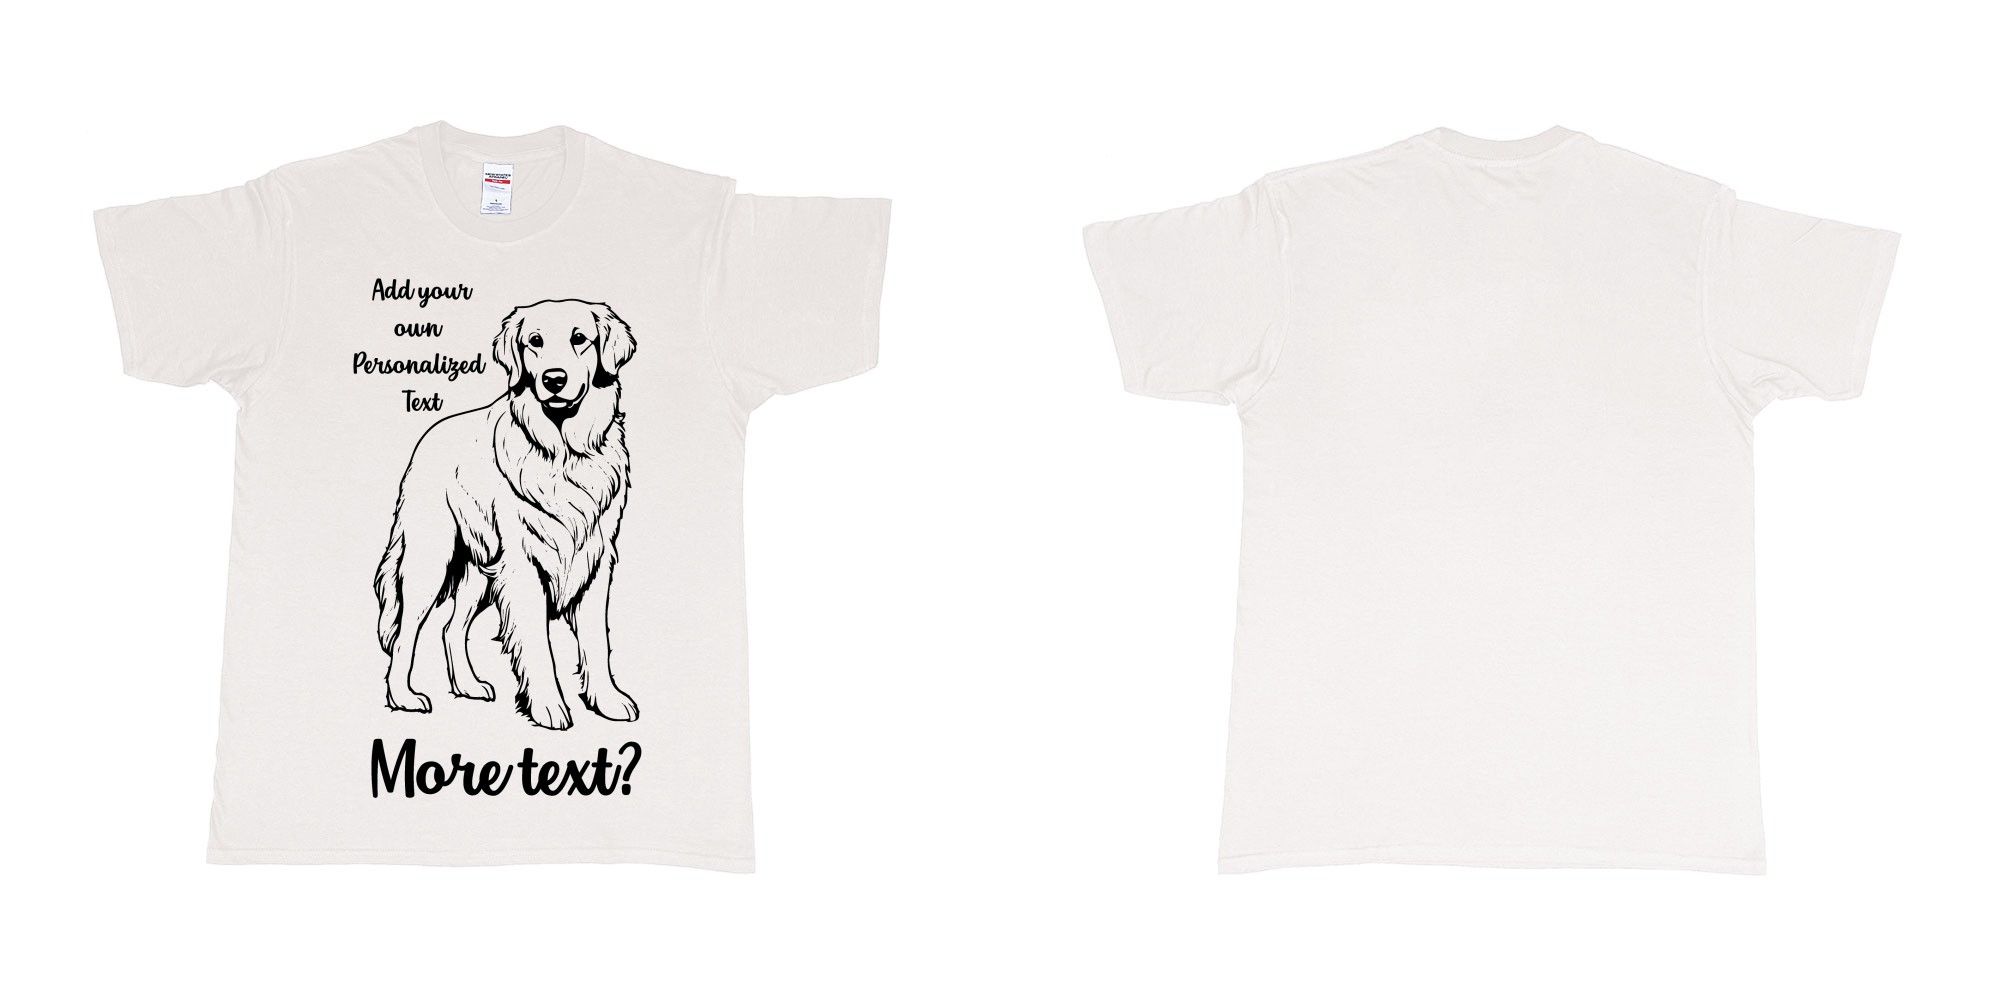 Custom tshirt design golden retriever dog breed personalized text in fabric color white choice your own text made in Bali by The Pirate Way